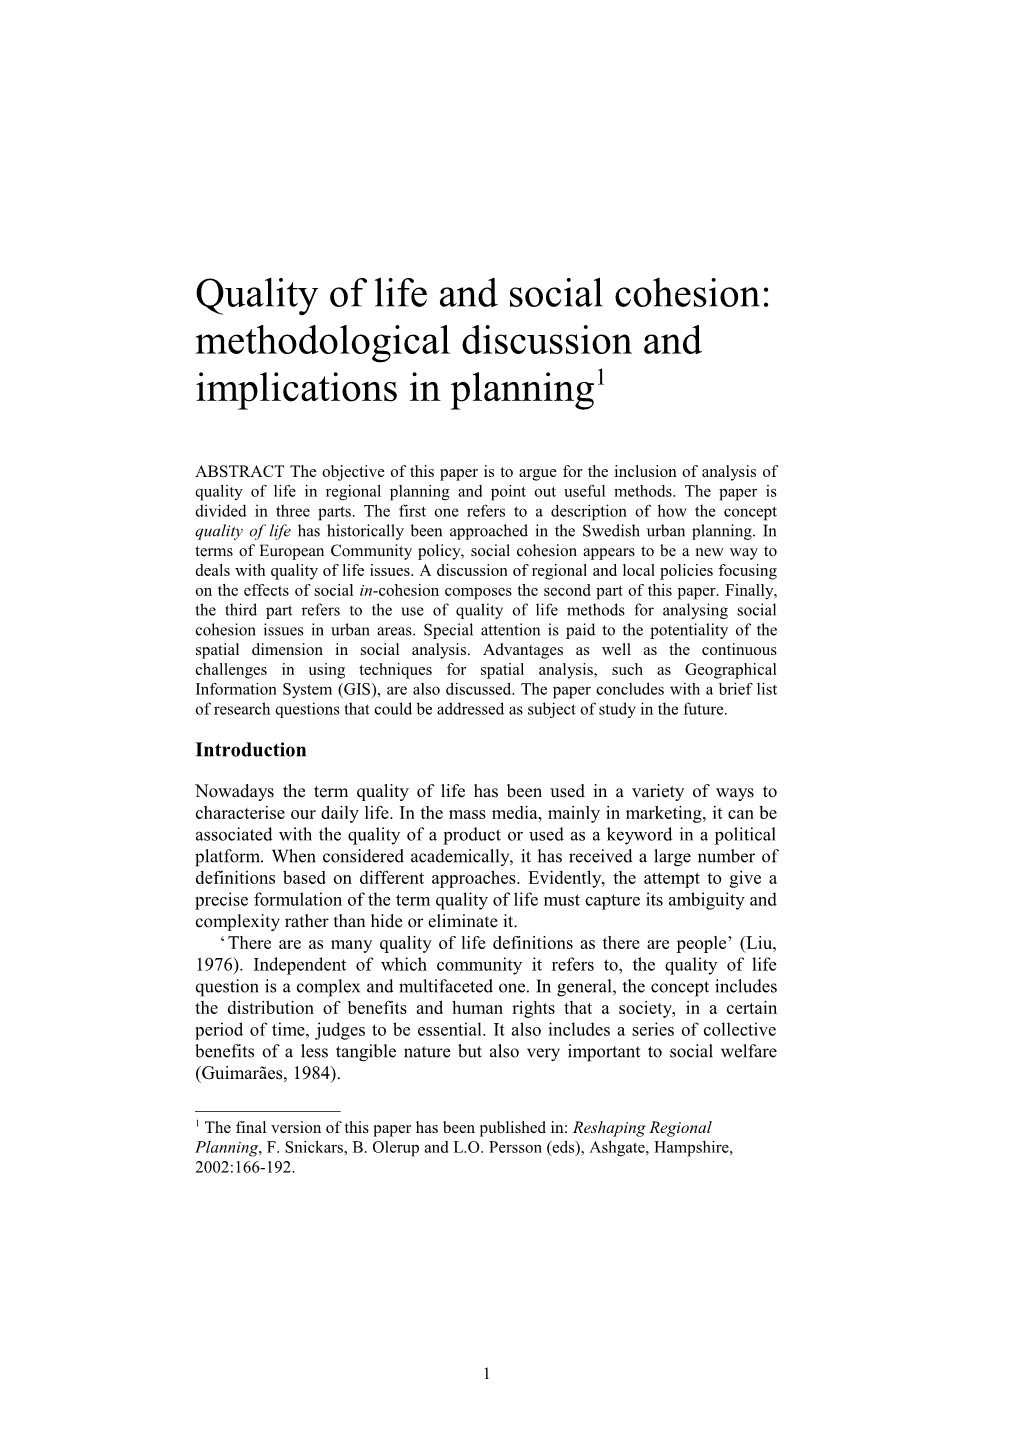 Social Cohesion and Quality of Life